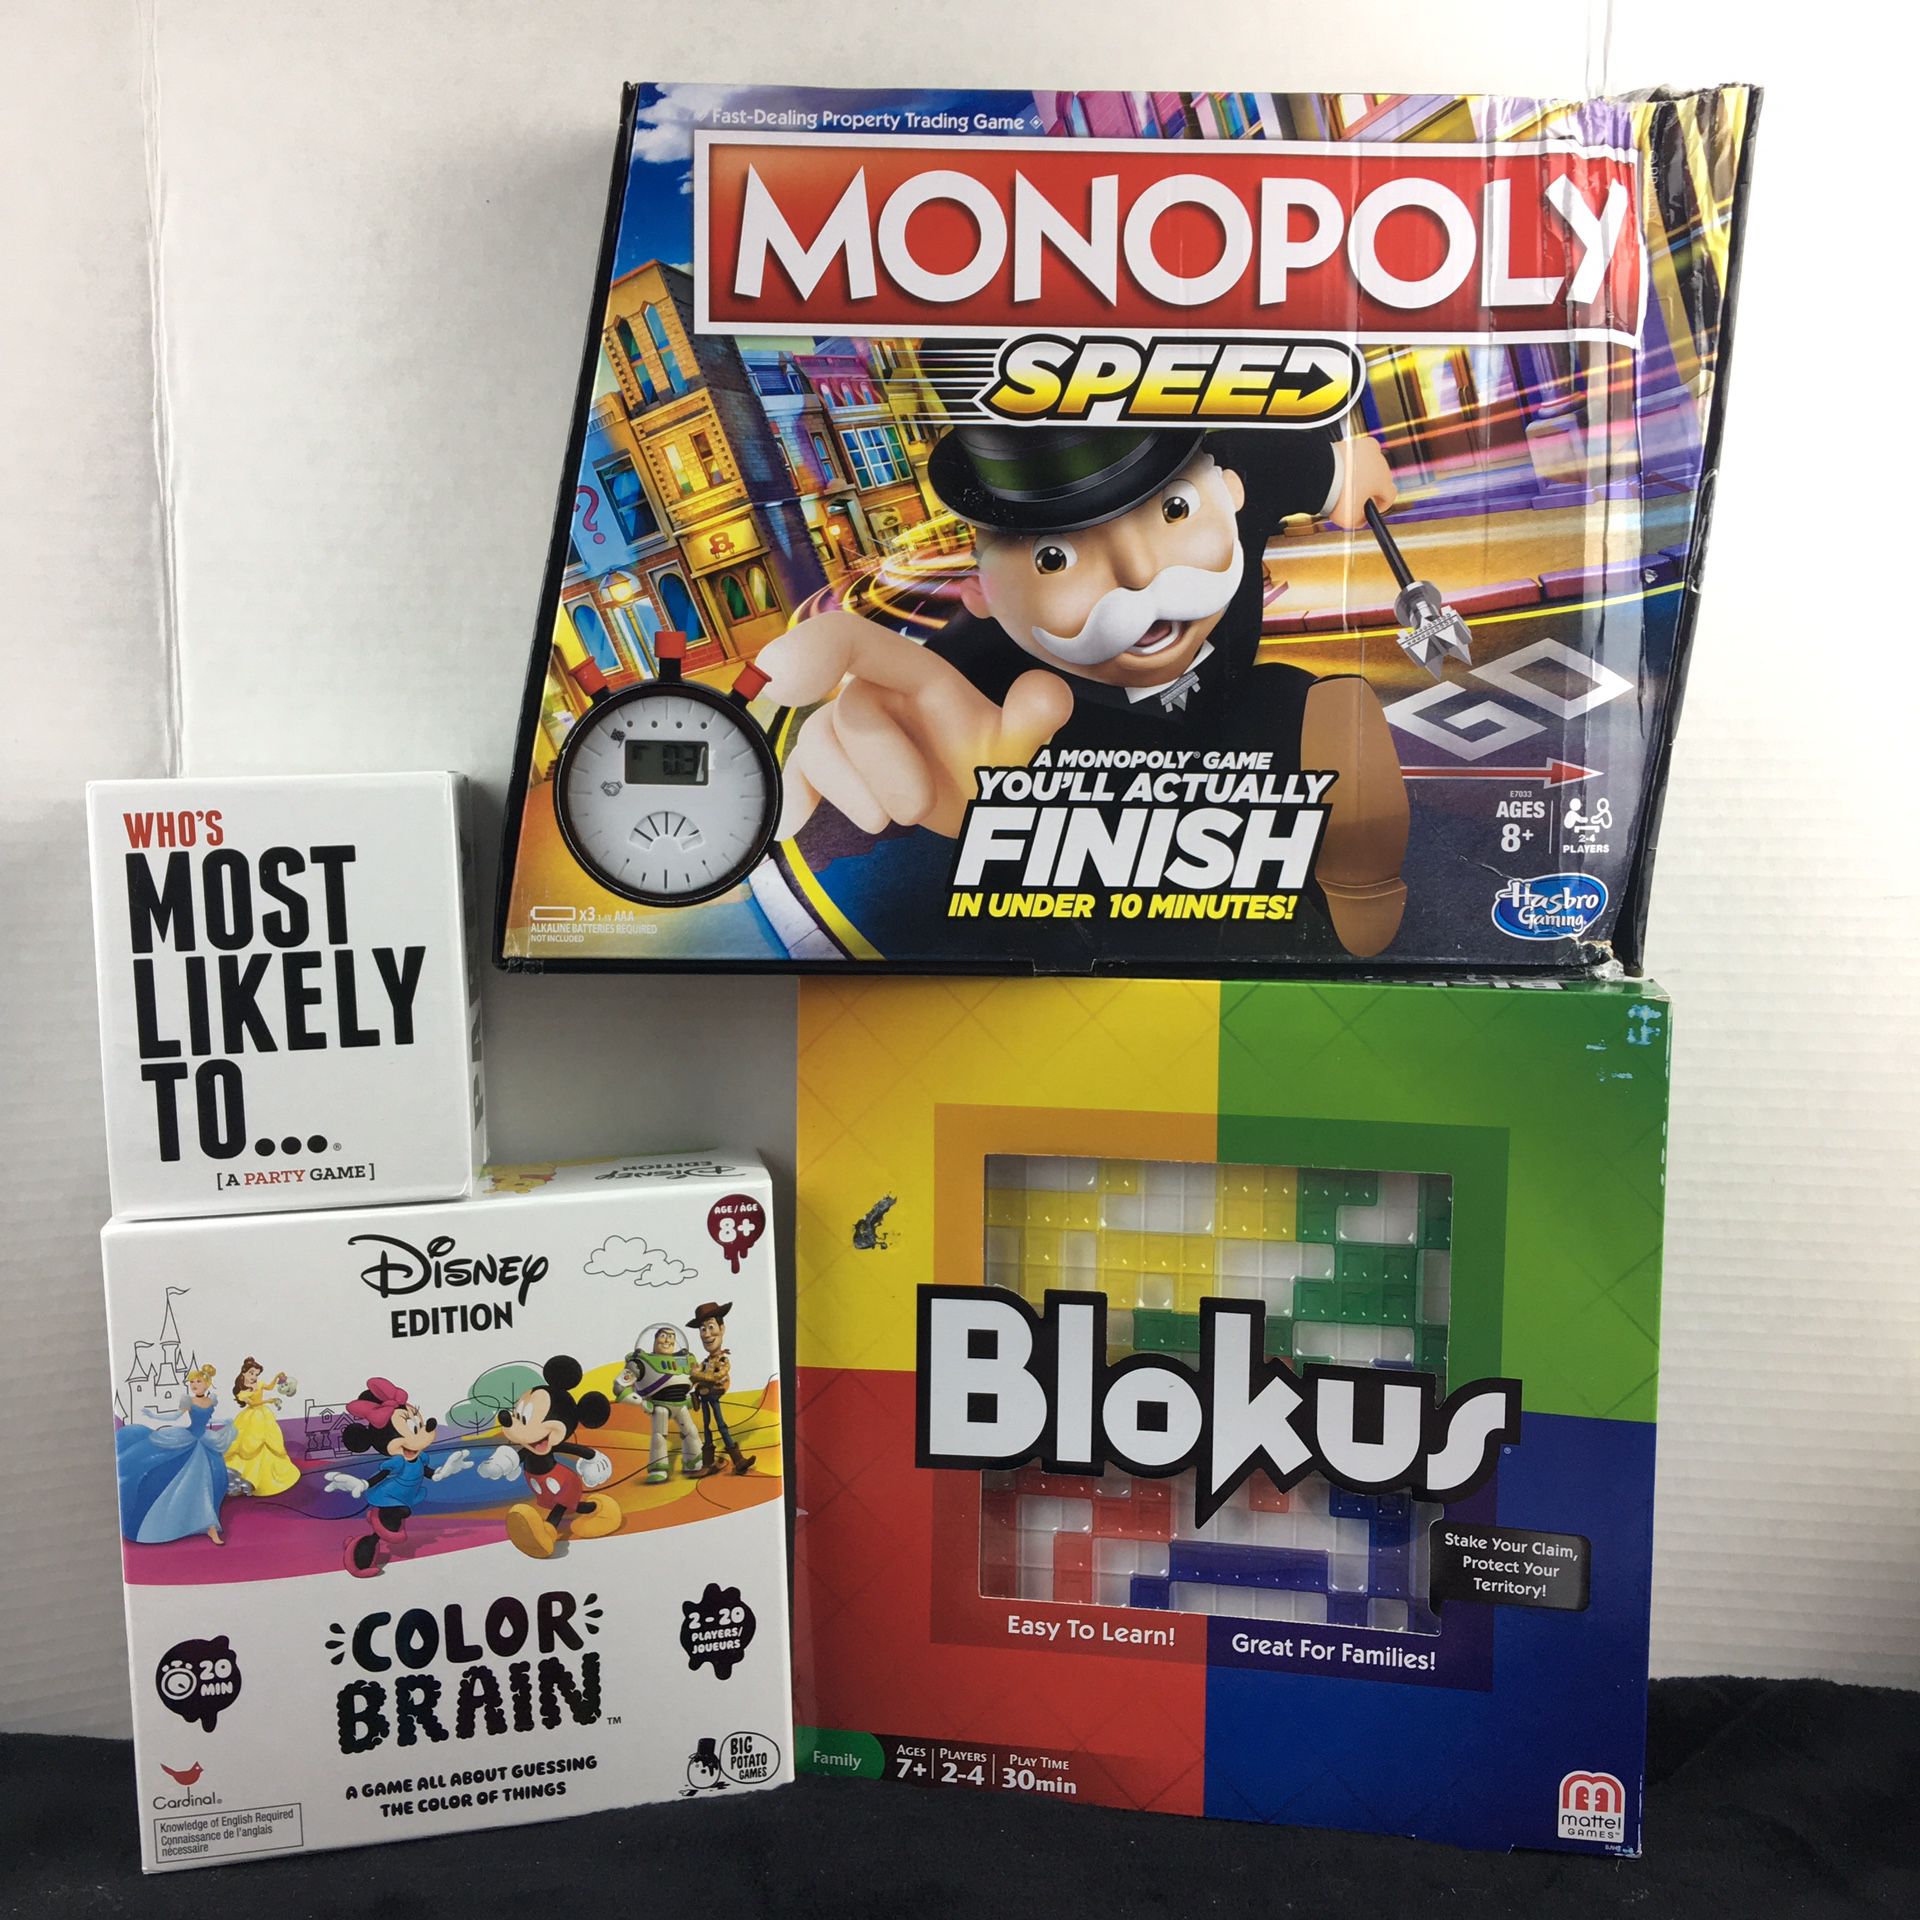 Monopoly, Disney, Blokus and Most likely